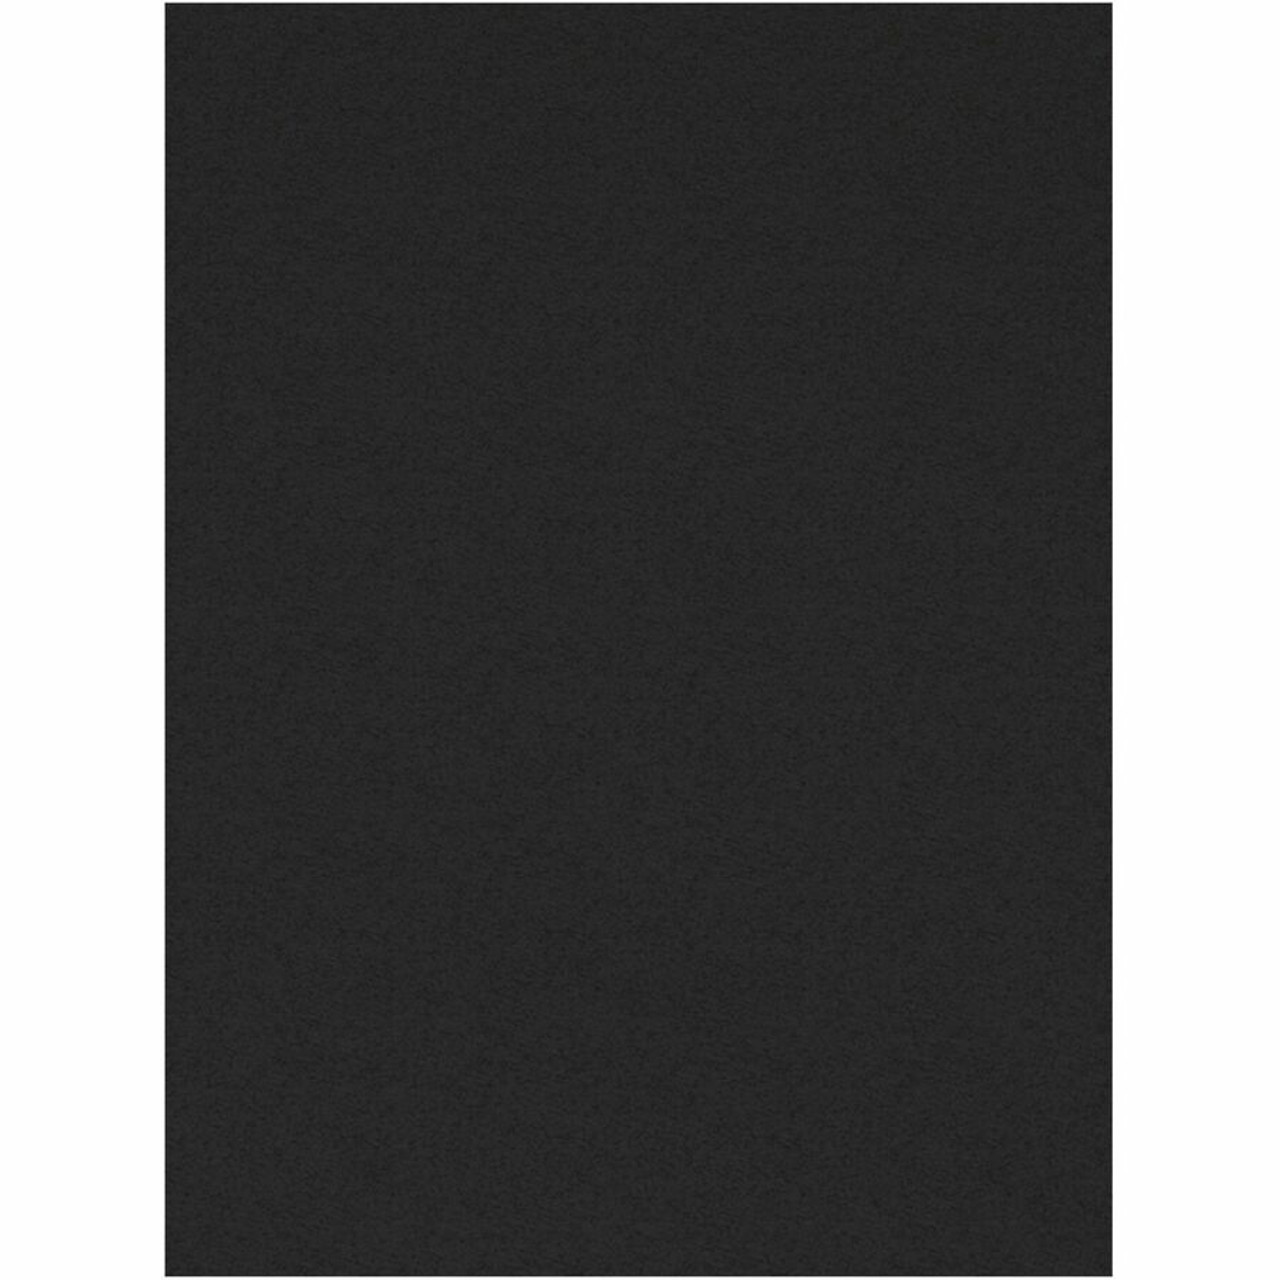  Pacon 103029 Tru-Ray Construction Paper, 76 lbs., 9 x 12,  Black, 50 Sheets/Pack : Arts, Crafts & Sewing